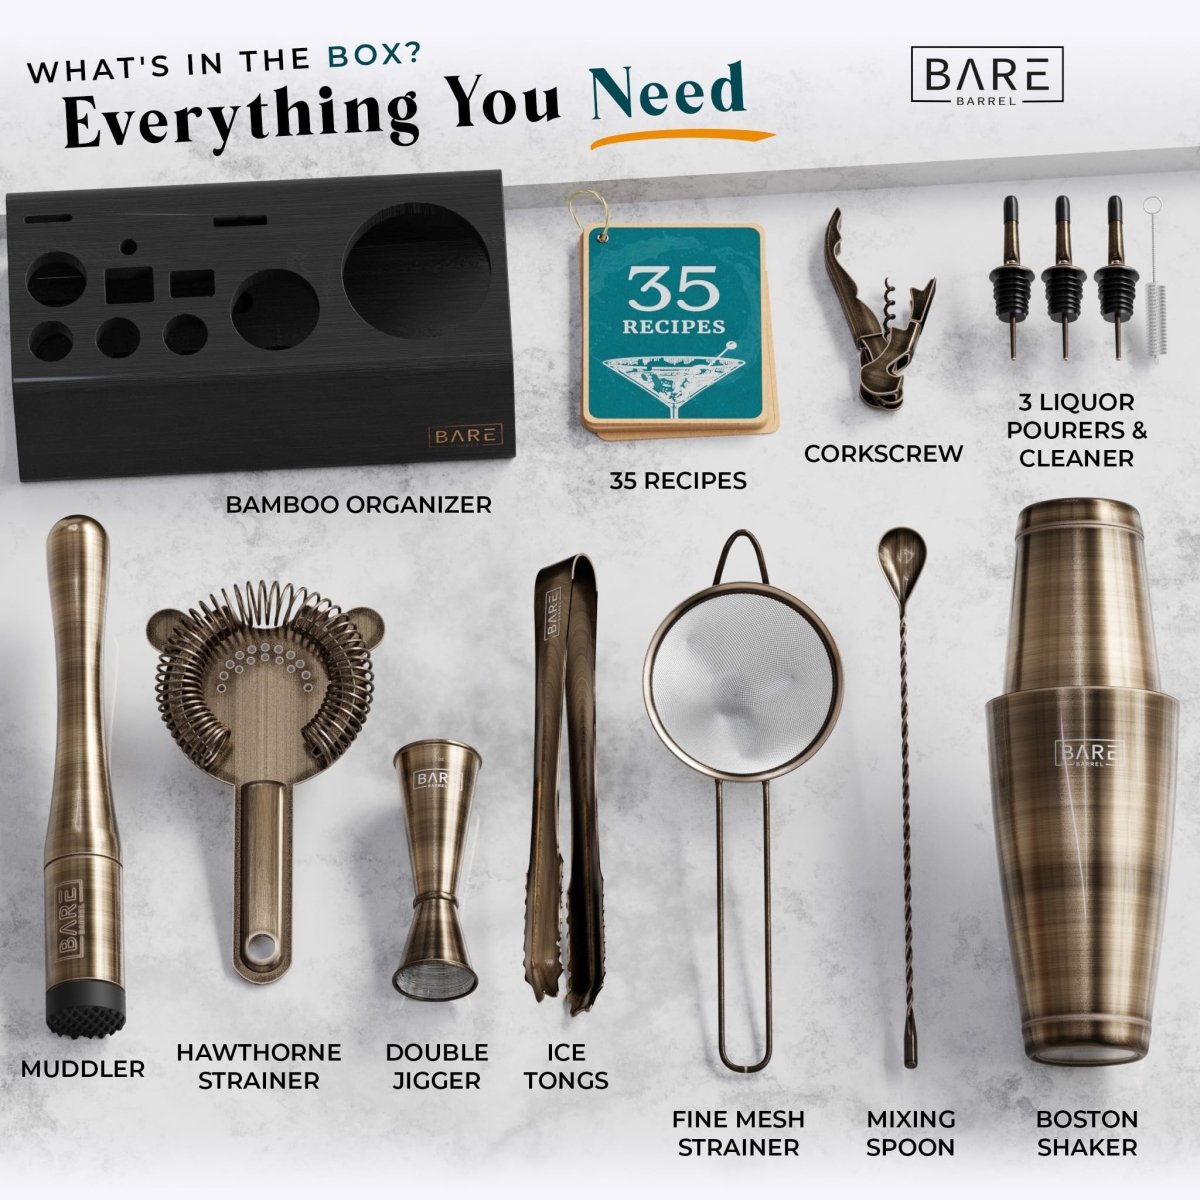 BARE BARREL® 14-Piece Professional Cocktail Making Set - 7 colors | Includes 28oz Boston Shaker & Home Bar Mixing Tools with 35 Recipe Cards | Ideal Bartending Kit Gift Set - Easiley - B0CH83JXCR